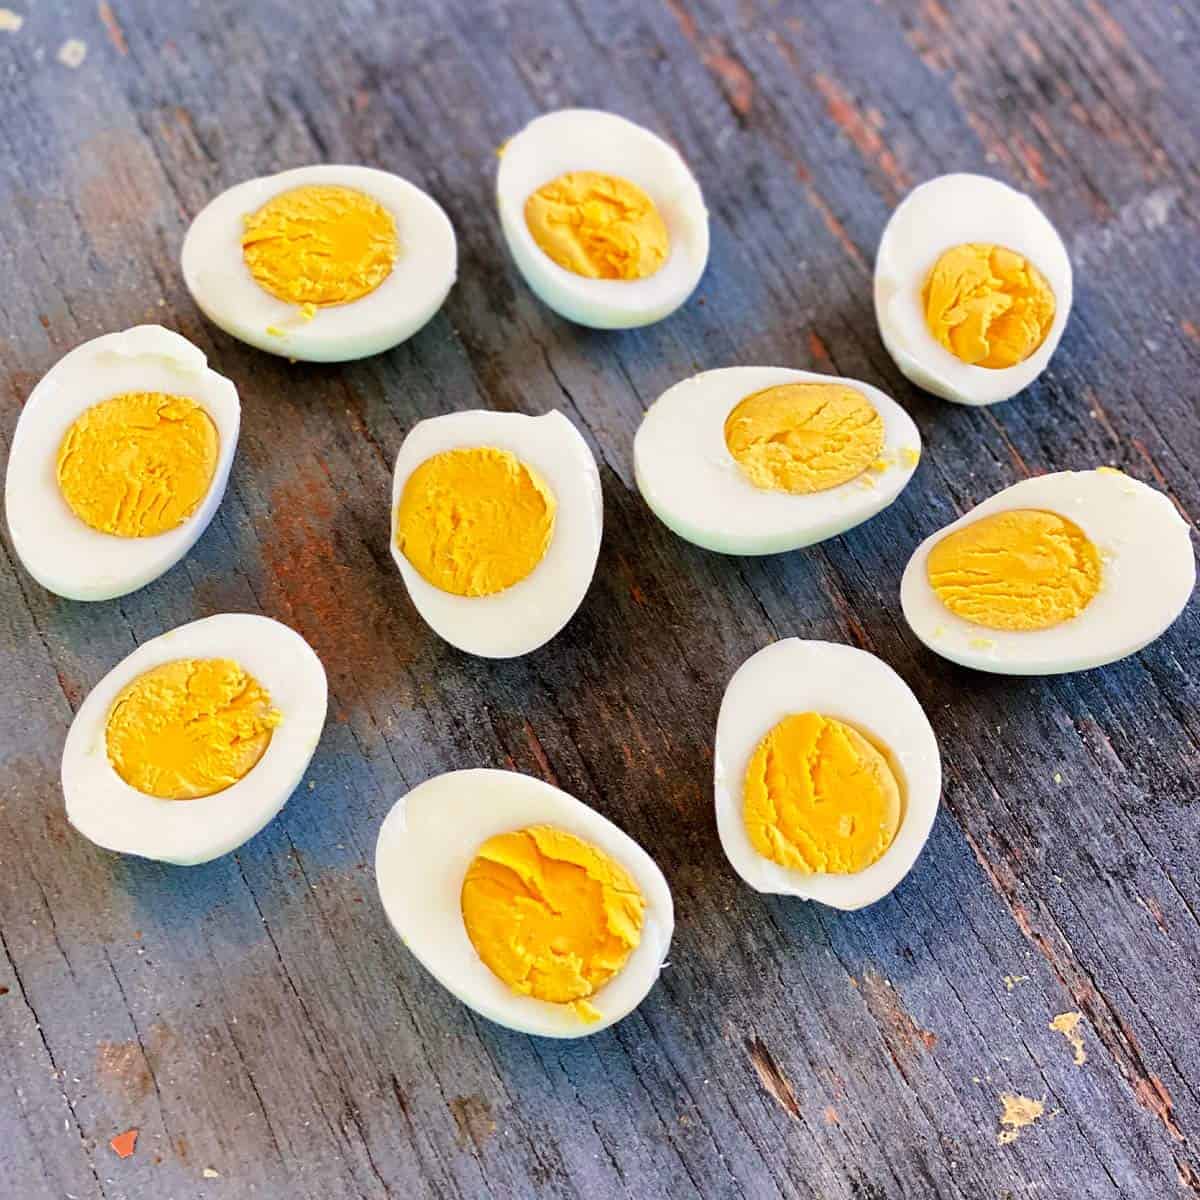 Instant pot hard boiled eggs on a wooden board